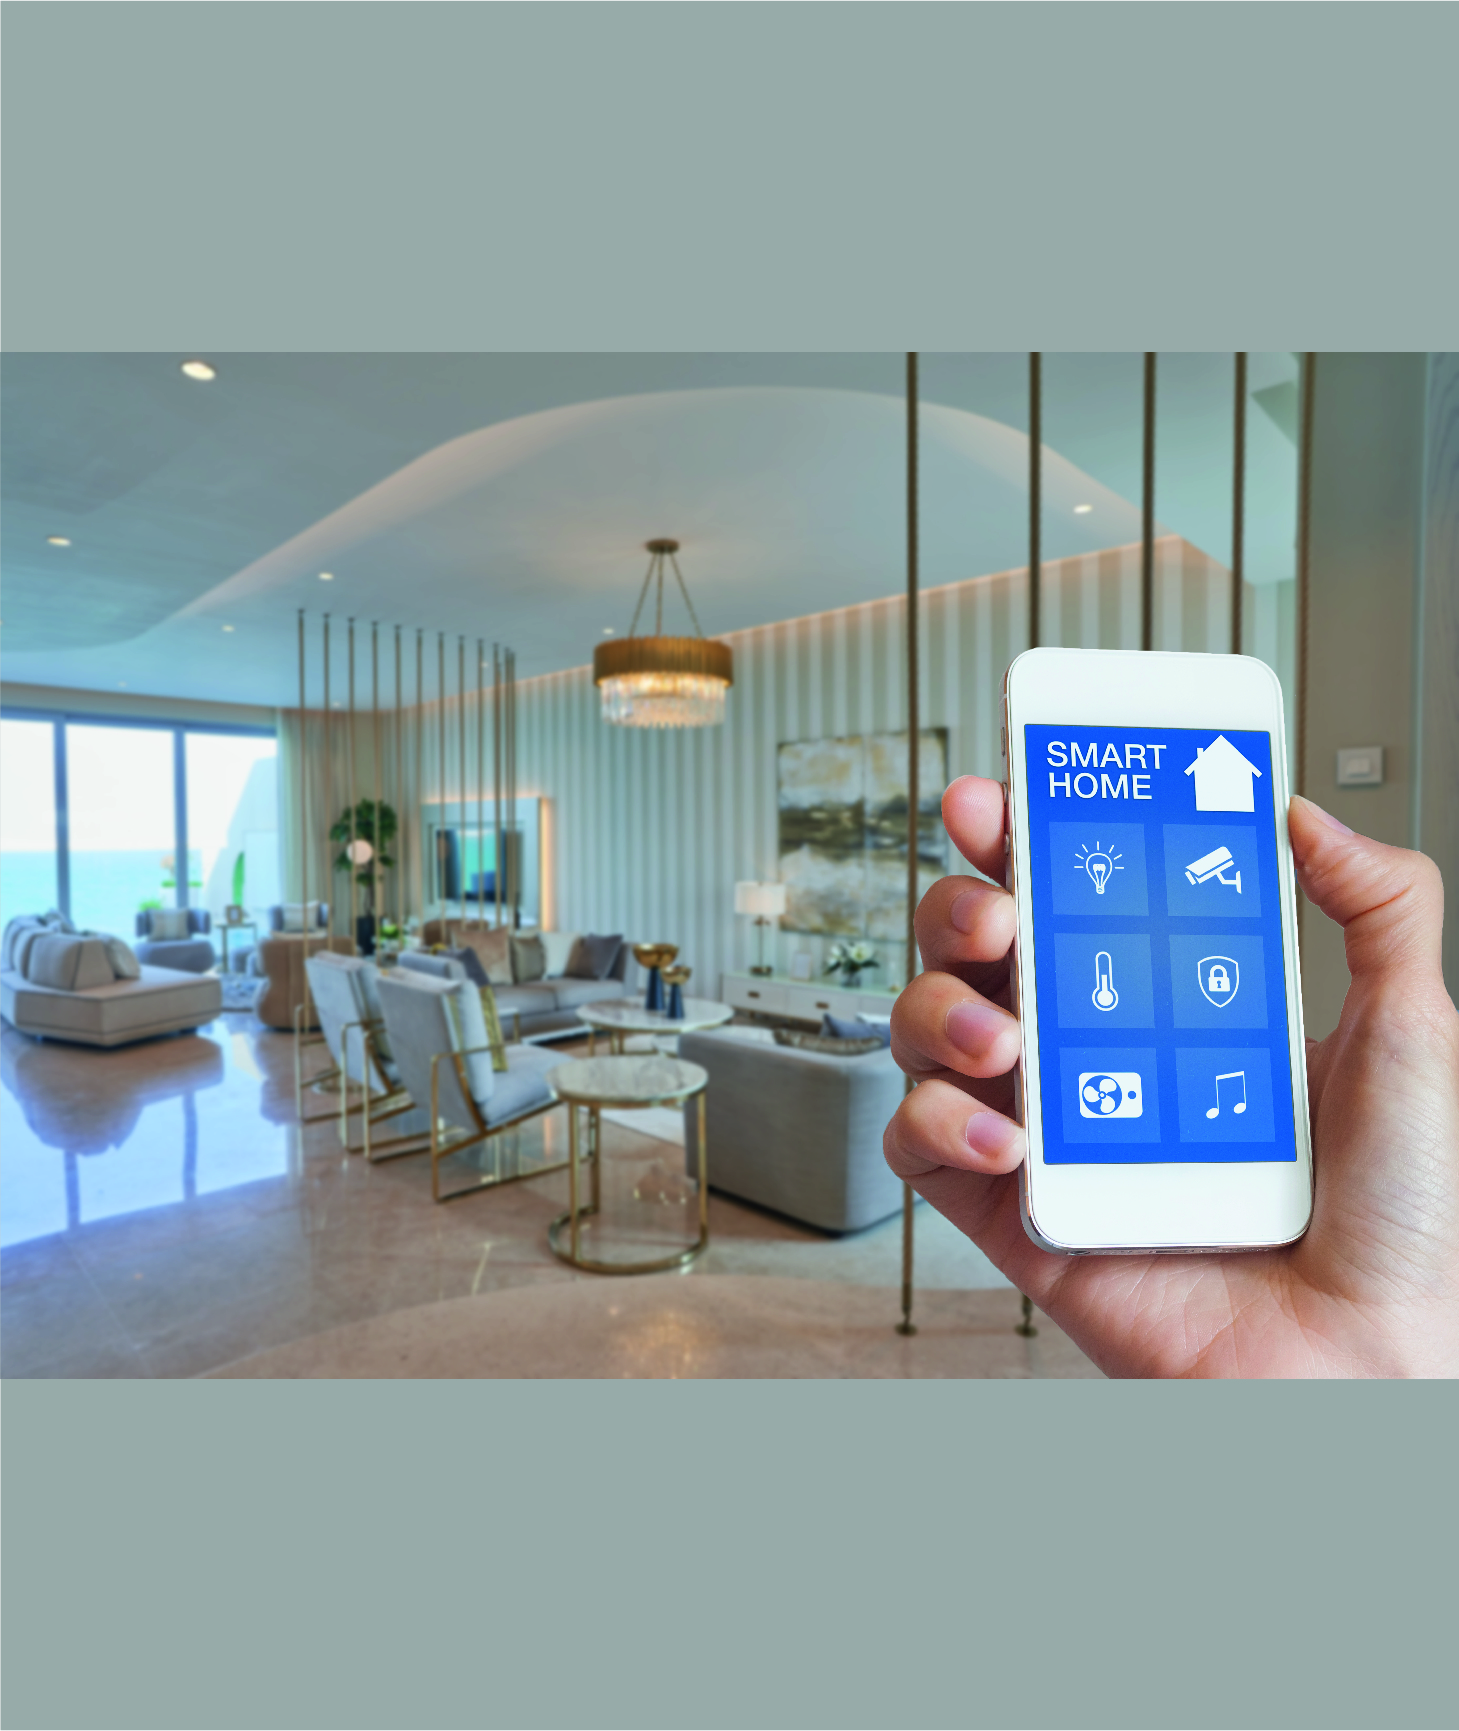 Technology at Home: The Smart Home Trend